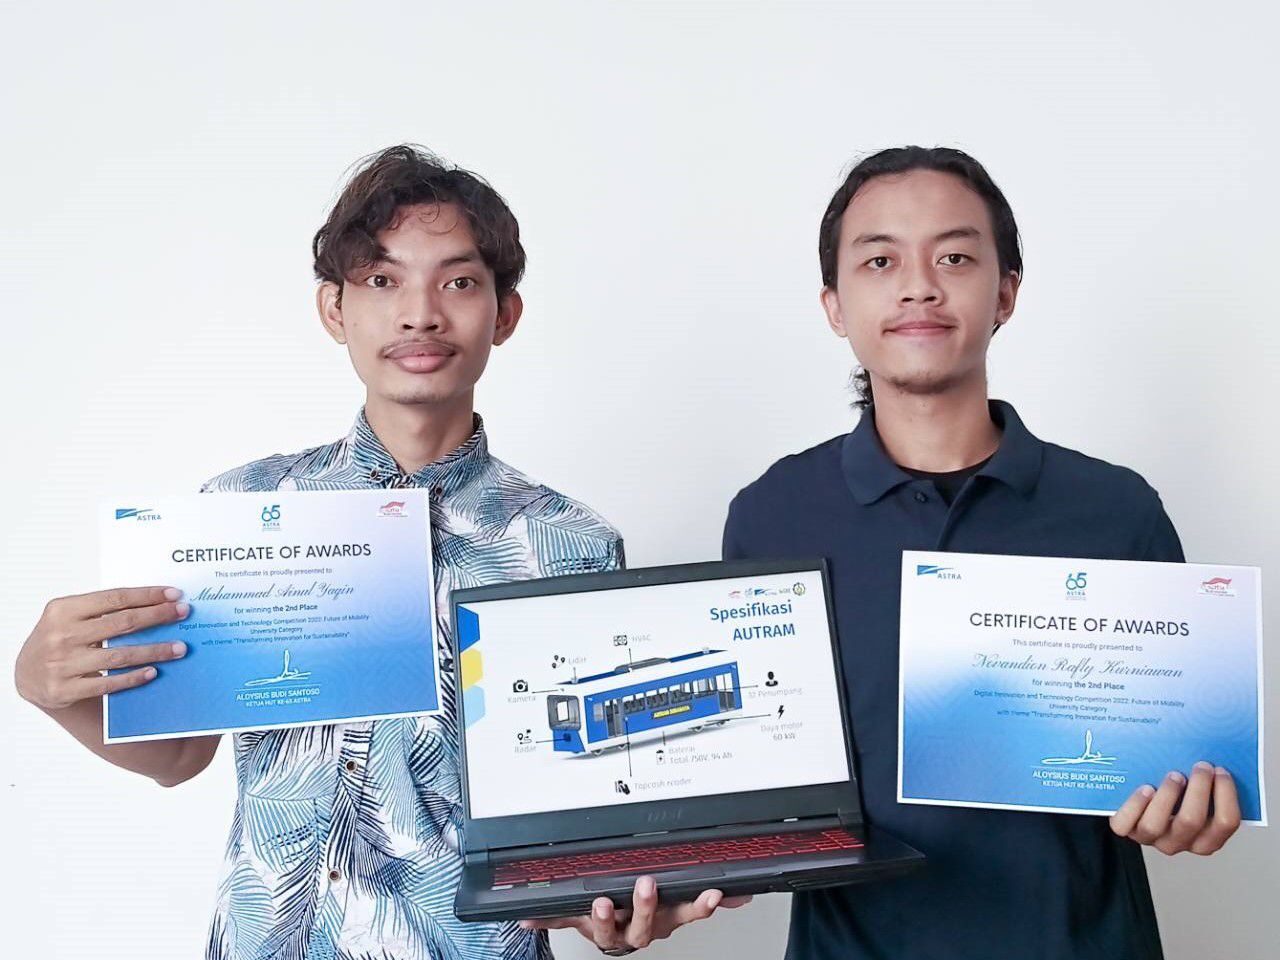 (from left) Muhammad Ainul Yaqin and Novandian Rafly Kurniawan are members of the ITS Solar Team, the initiators of the Autonomous Electric Tram (AUTRAM), also known as the driverless tram